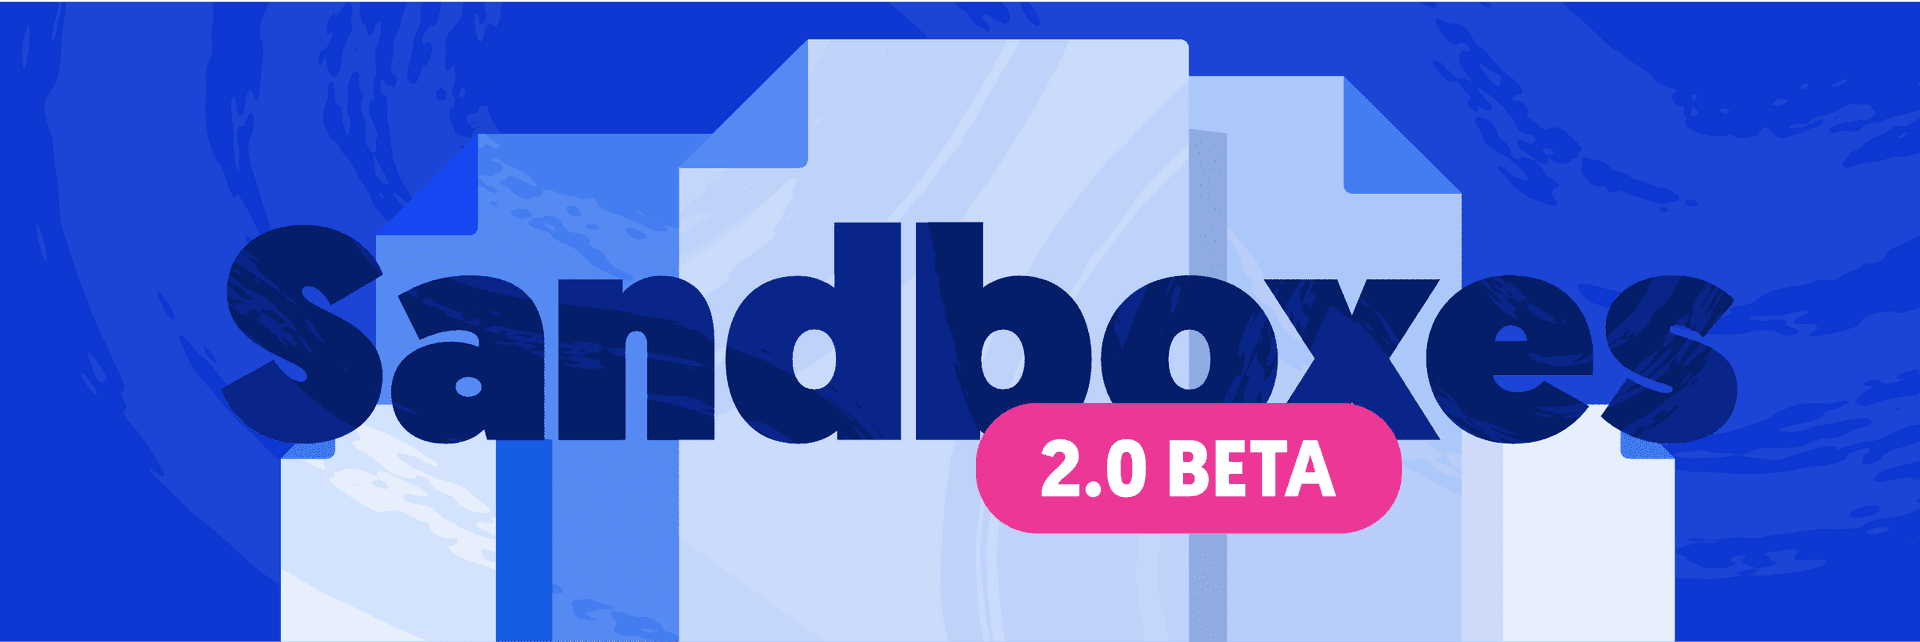 Sandboxes now available in all paid accounts! 💸🔥